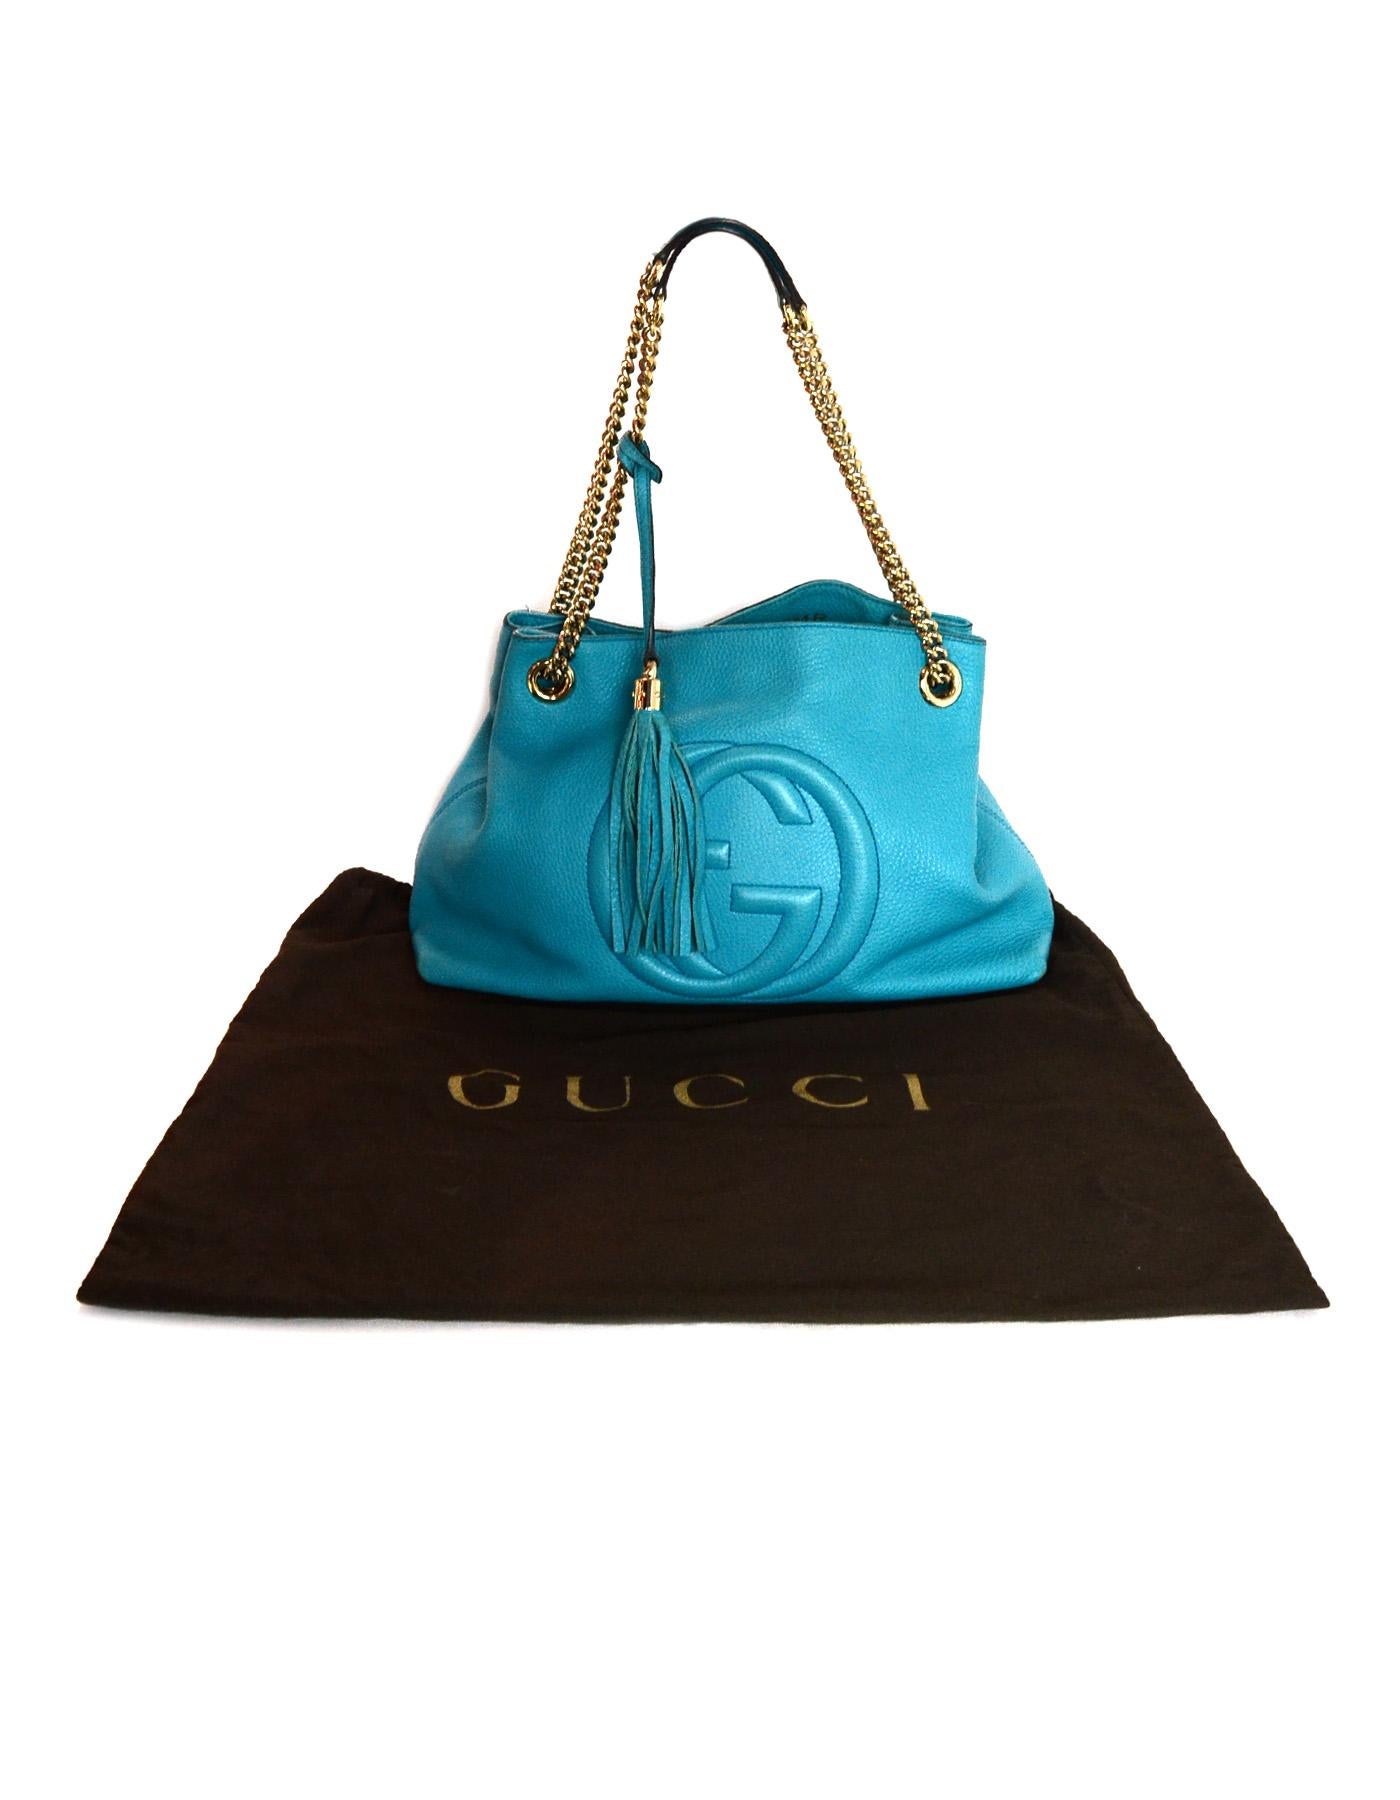 Gucci GG Logo Turquoise Pebbled Leather Soho Chain Tote Tassel Bag 6